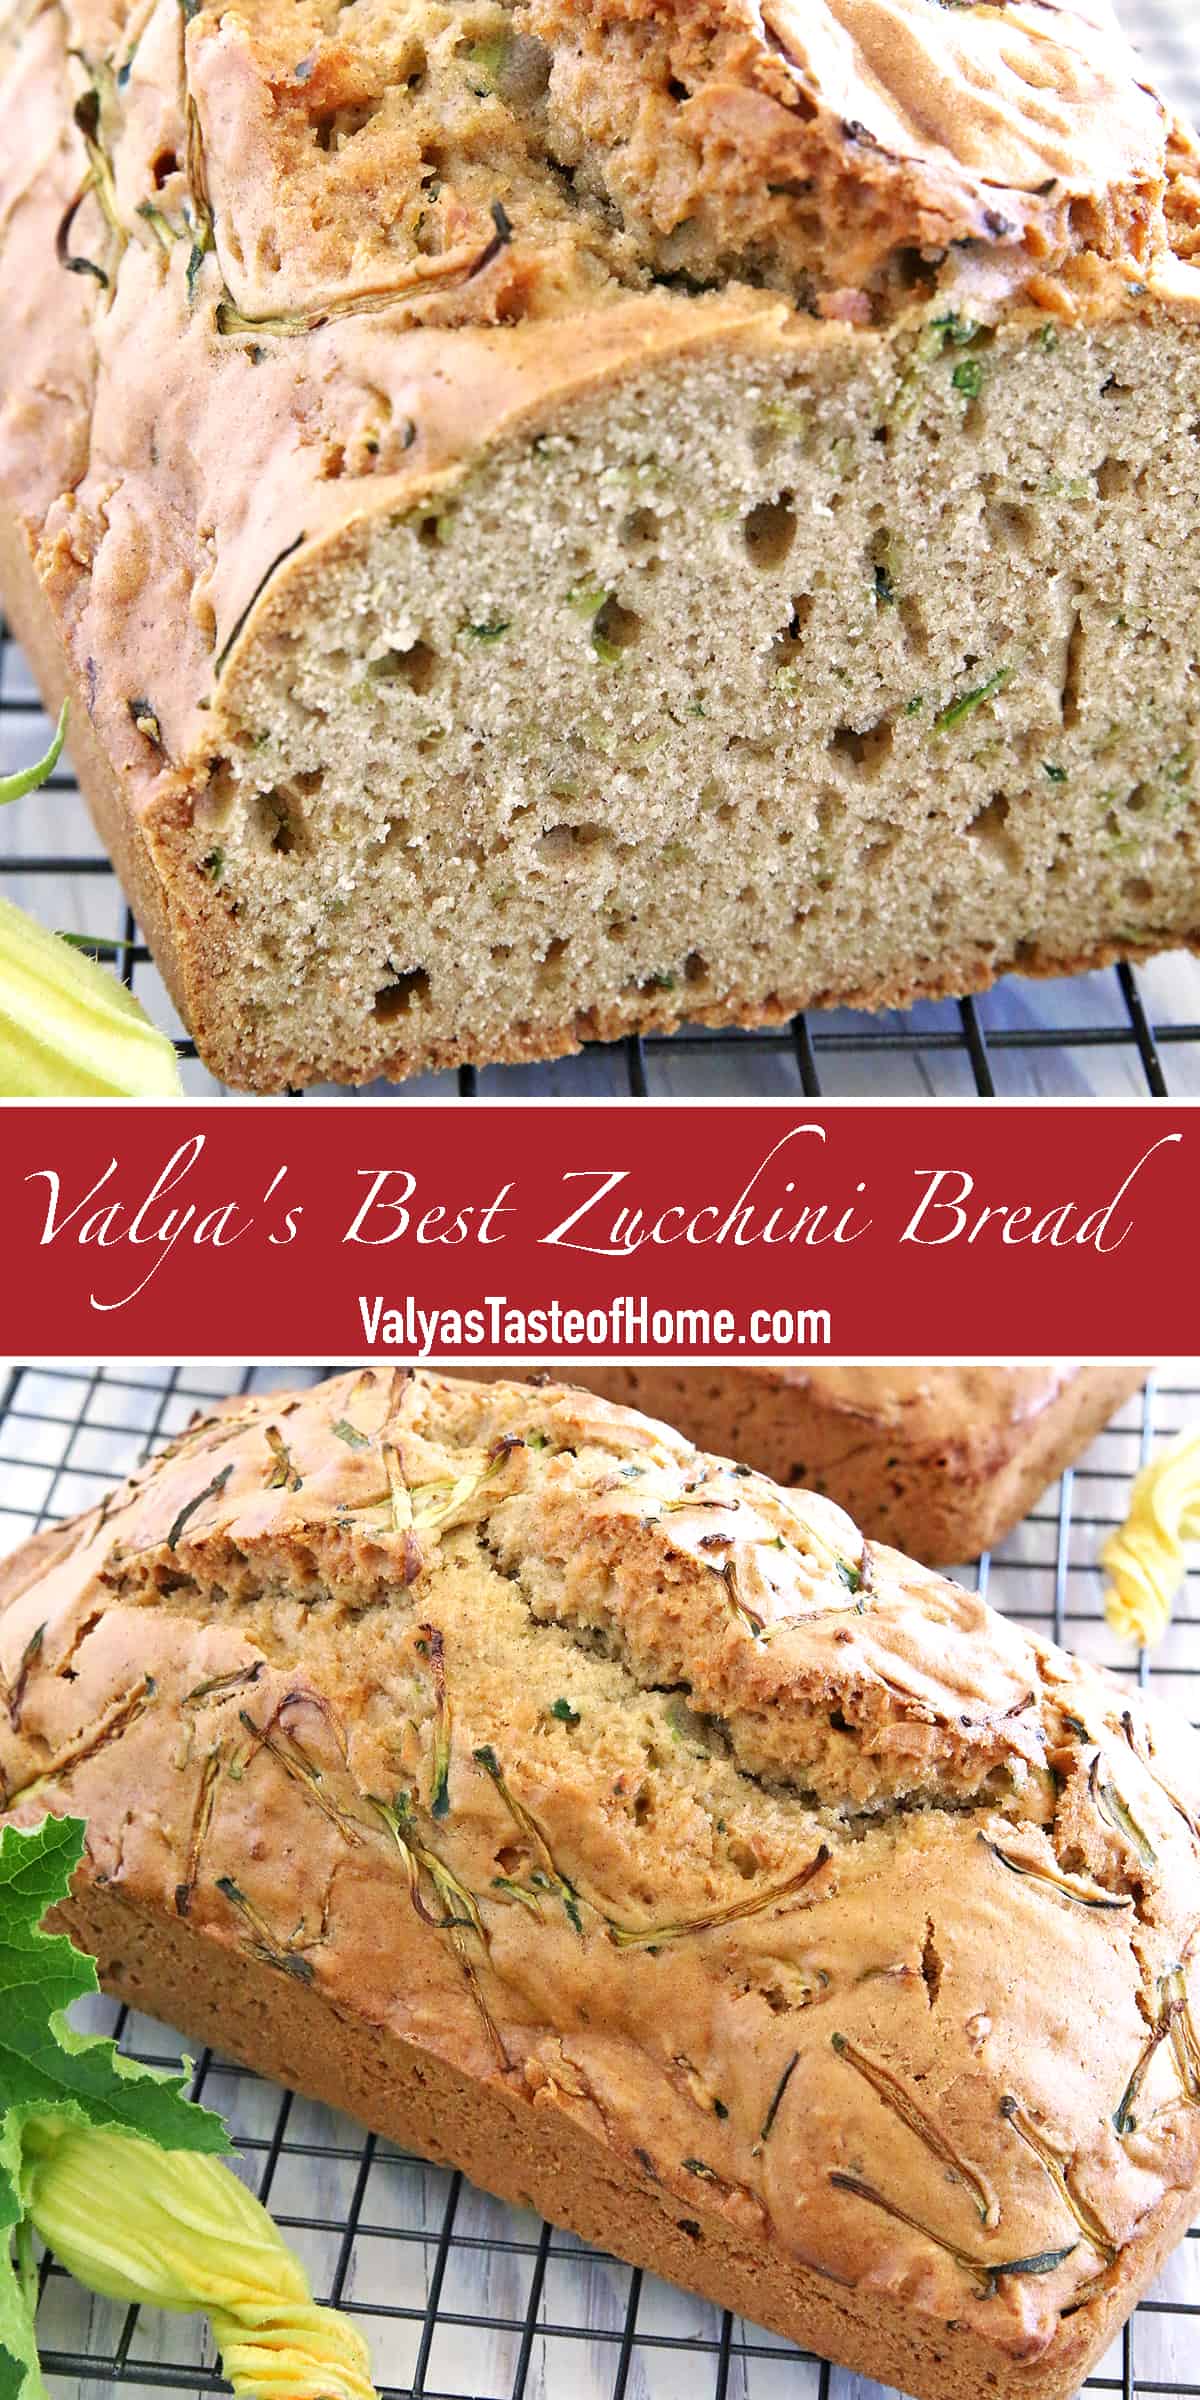 Now all of our family think this Valya's Best Zucchini Bread recipe is truly the best and moistest zucchini bread on earth! We grow zucchini in the garden every year and kids make this bread at least twice a week during zucchini season.